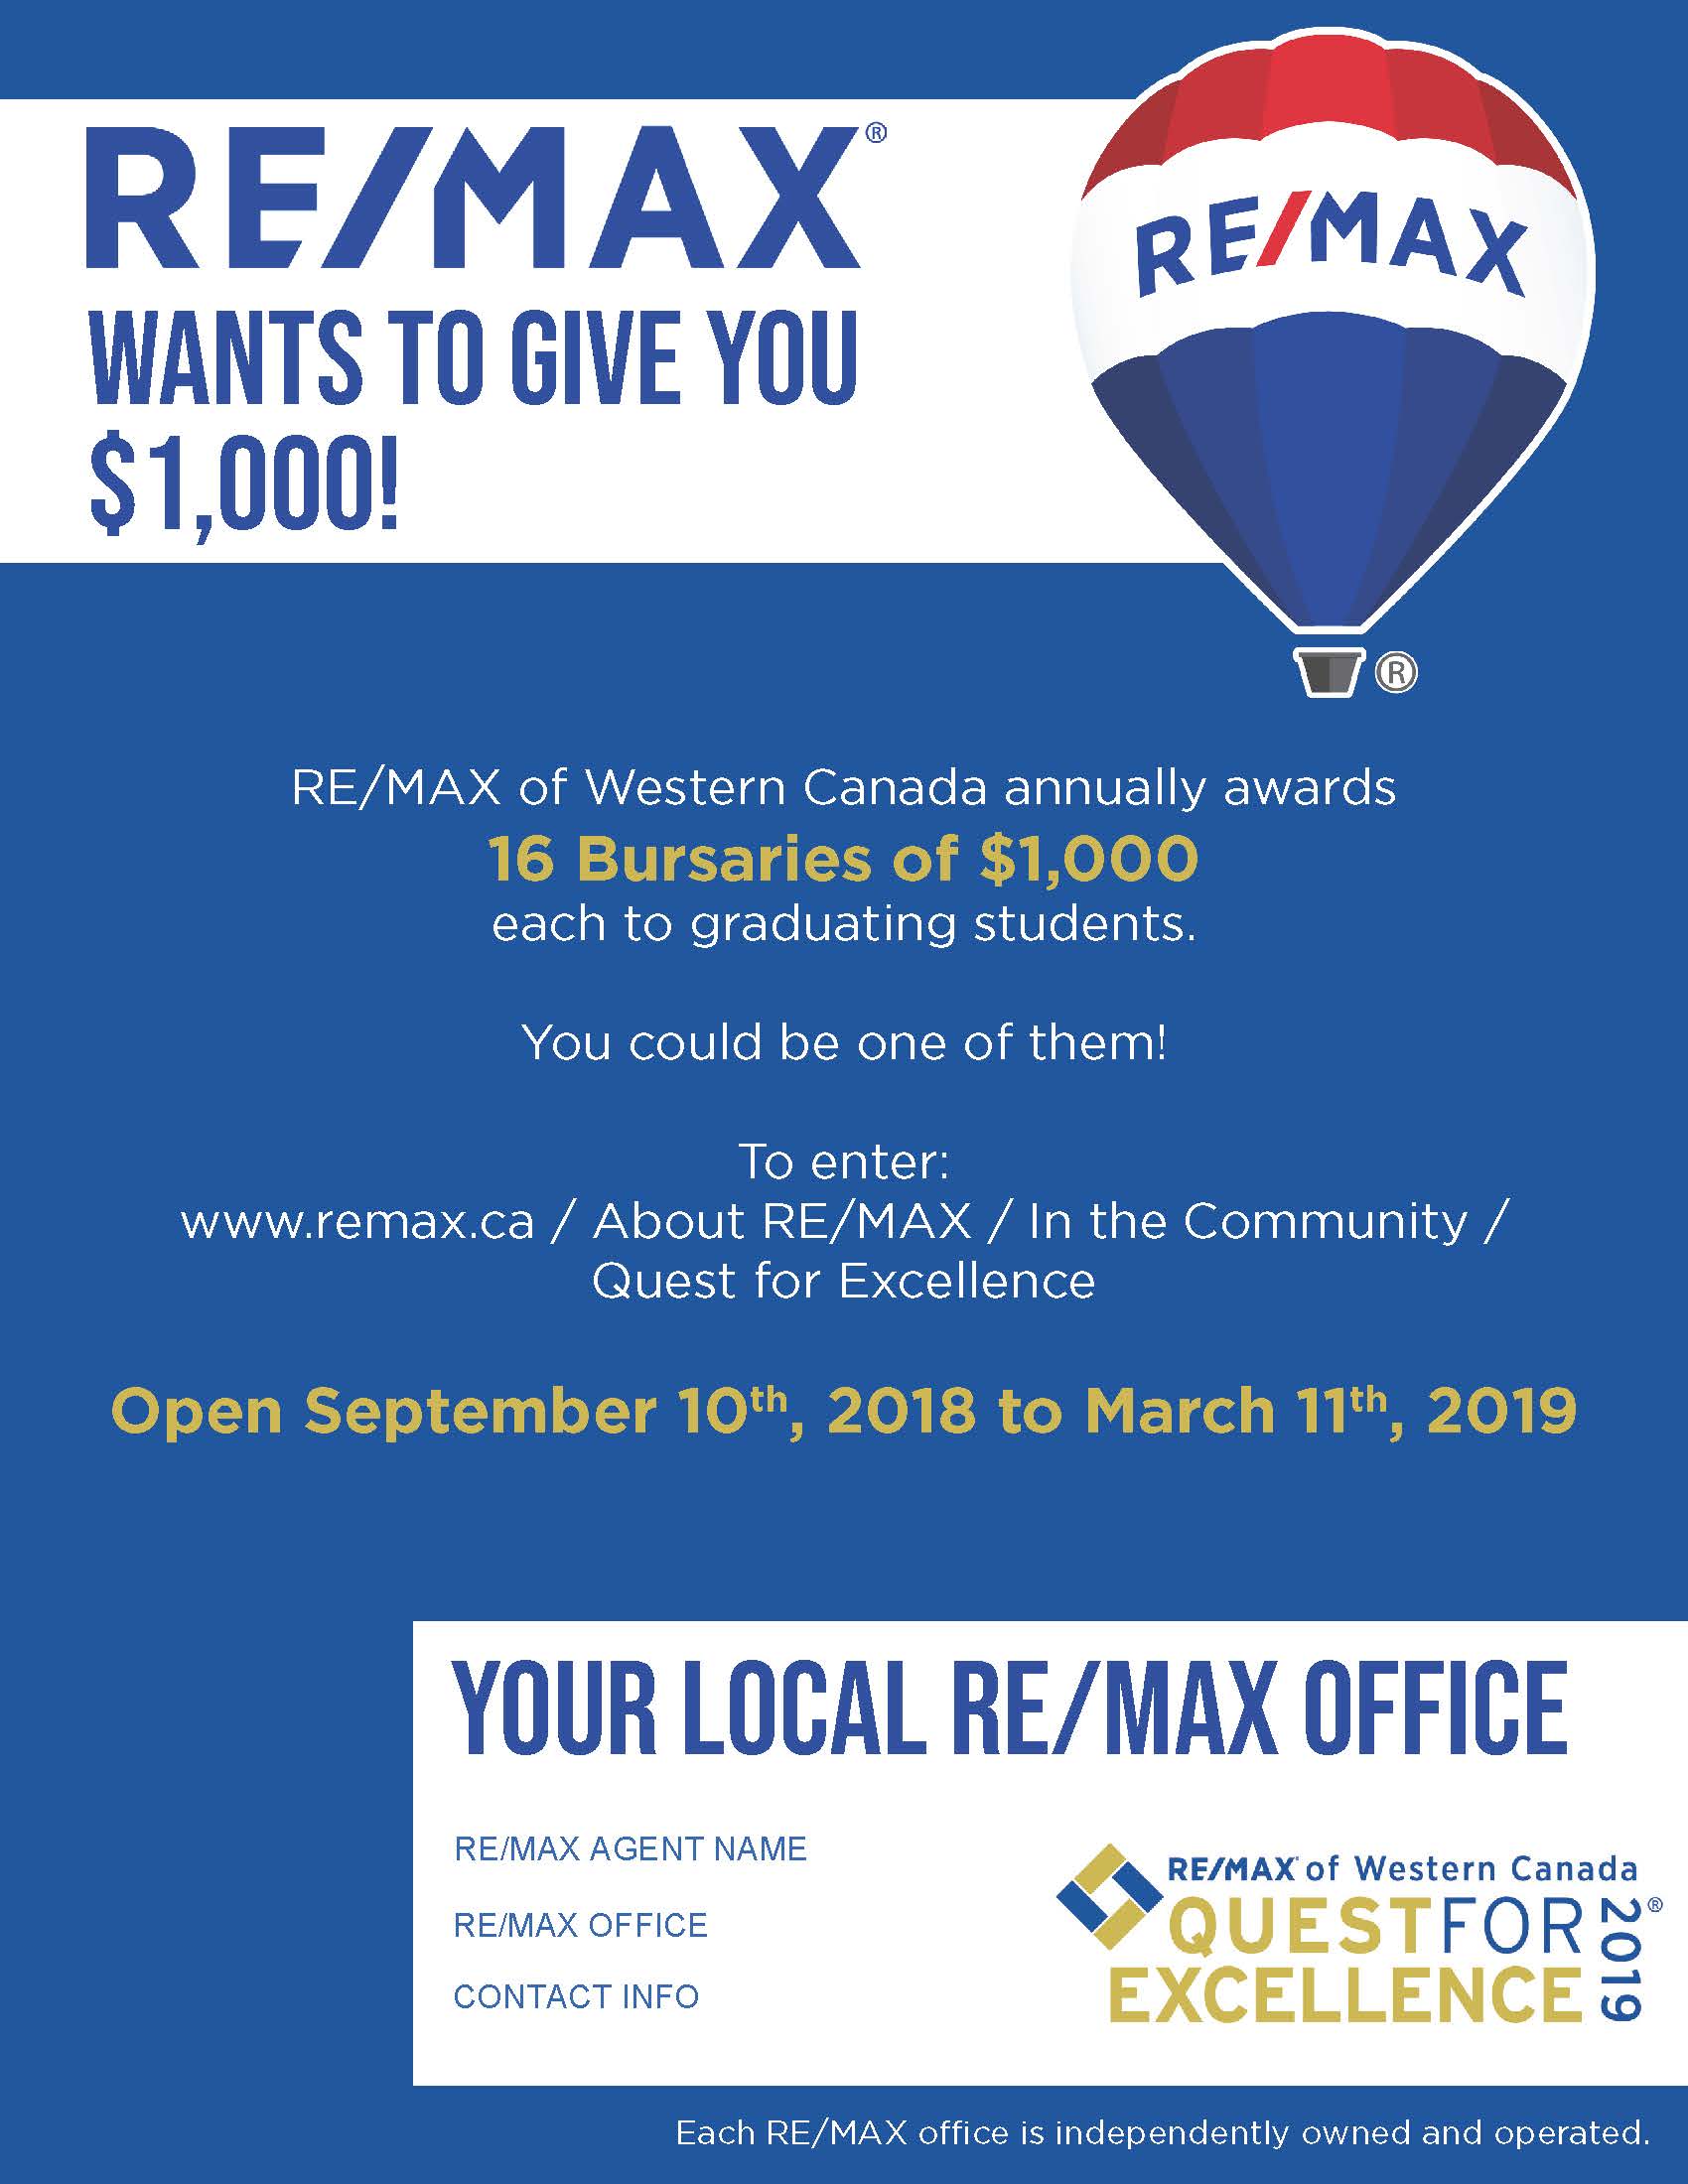 REMAX quest for excellence